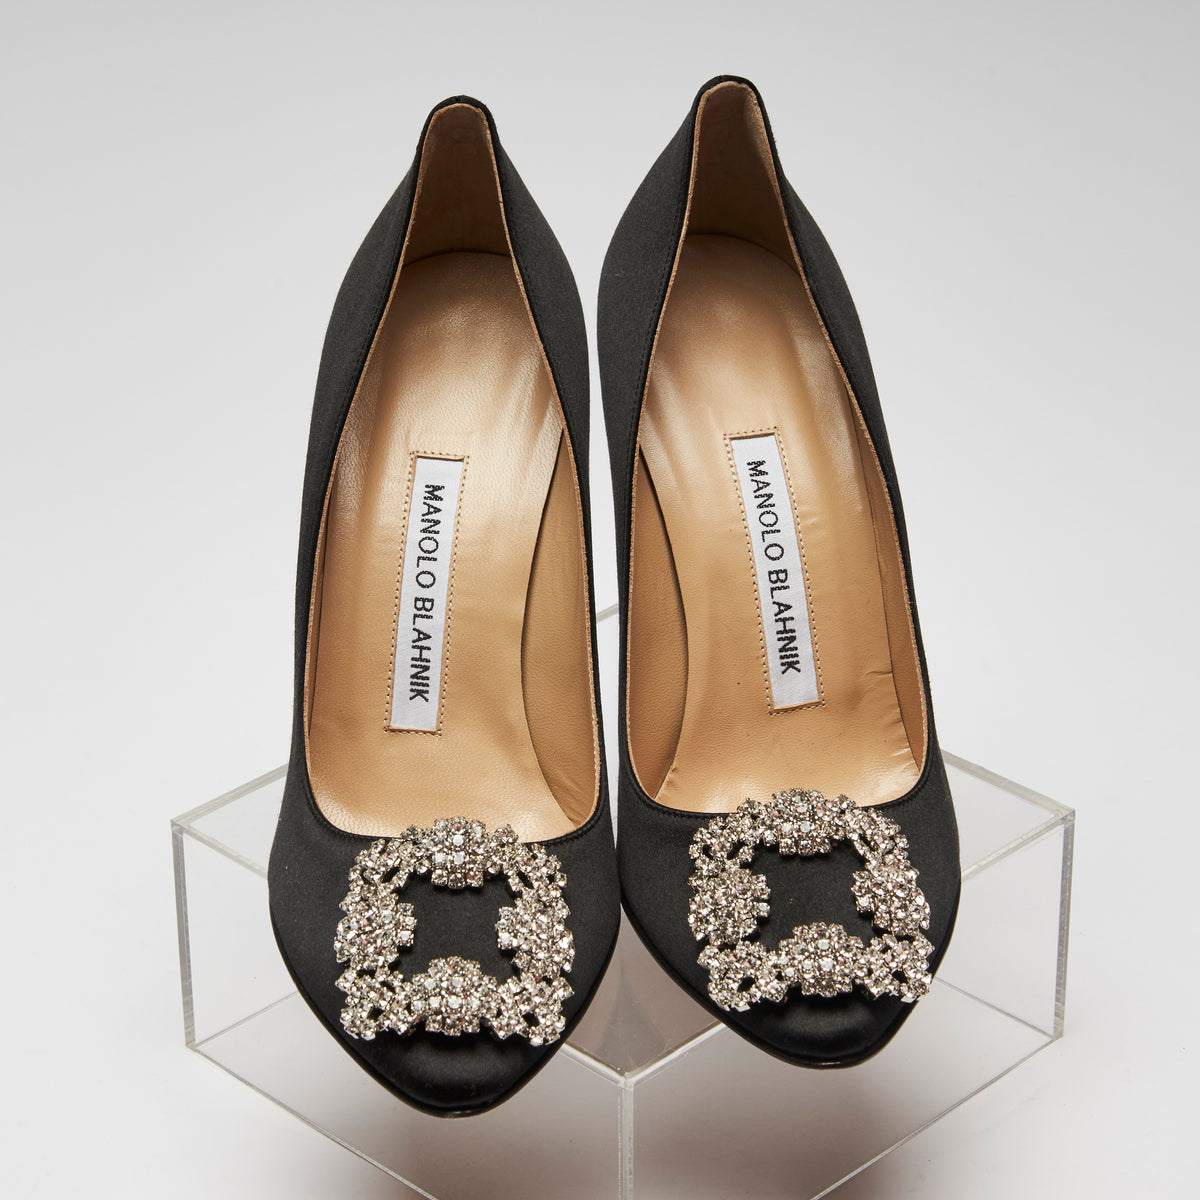 Excellent Pre-Loved Black Satin Heels with White Crystal Buckle Ornament/Dark Crystal Buckle Ornament.(front)